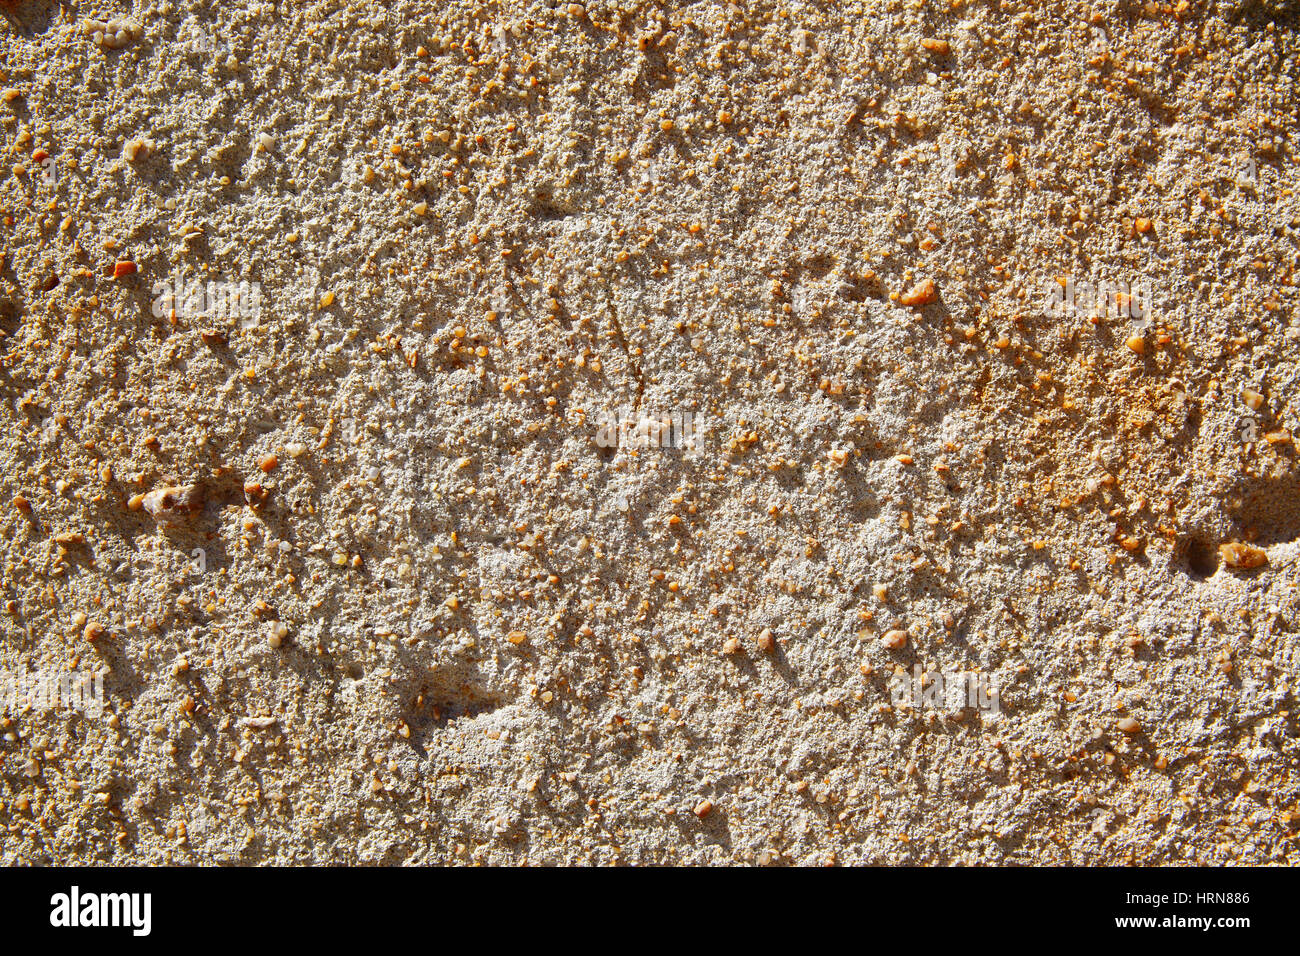 Stone block texture close-up, may be used asbackground Stock Photo